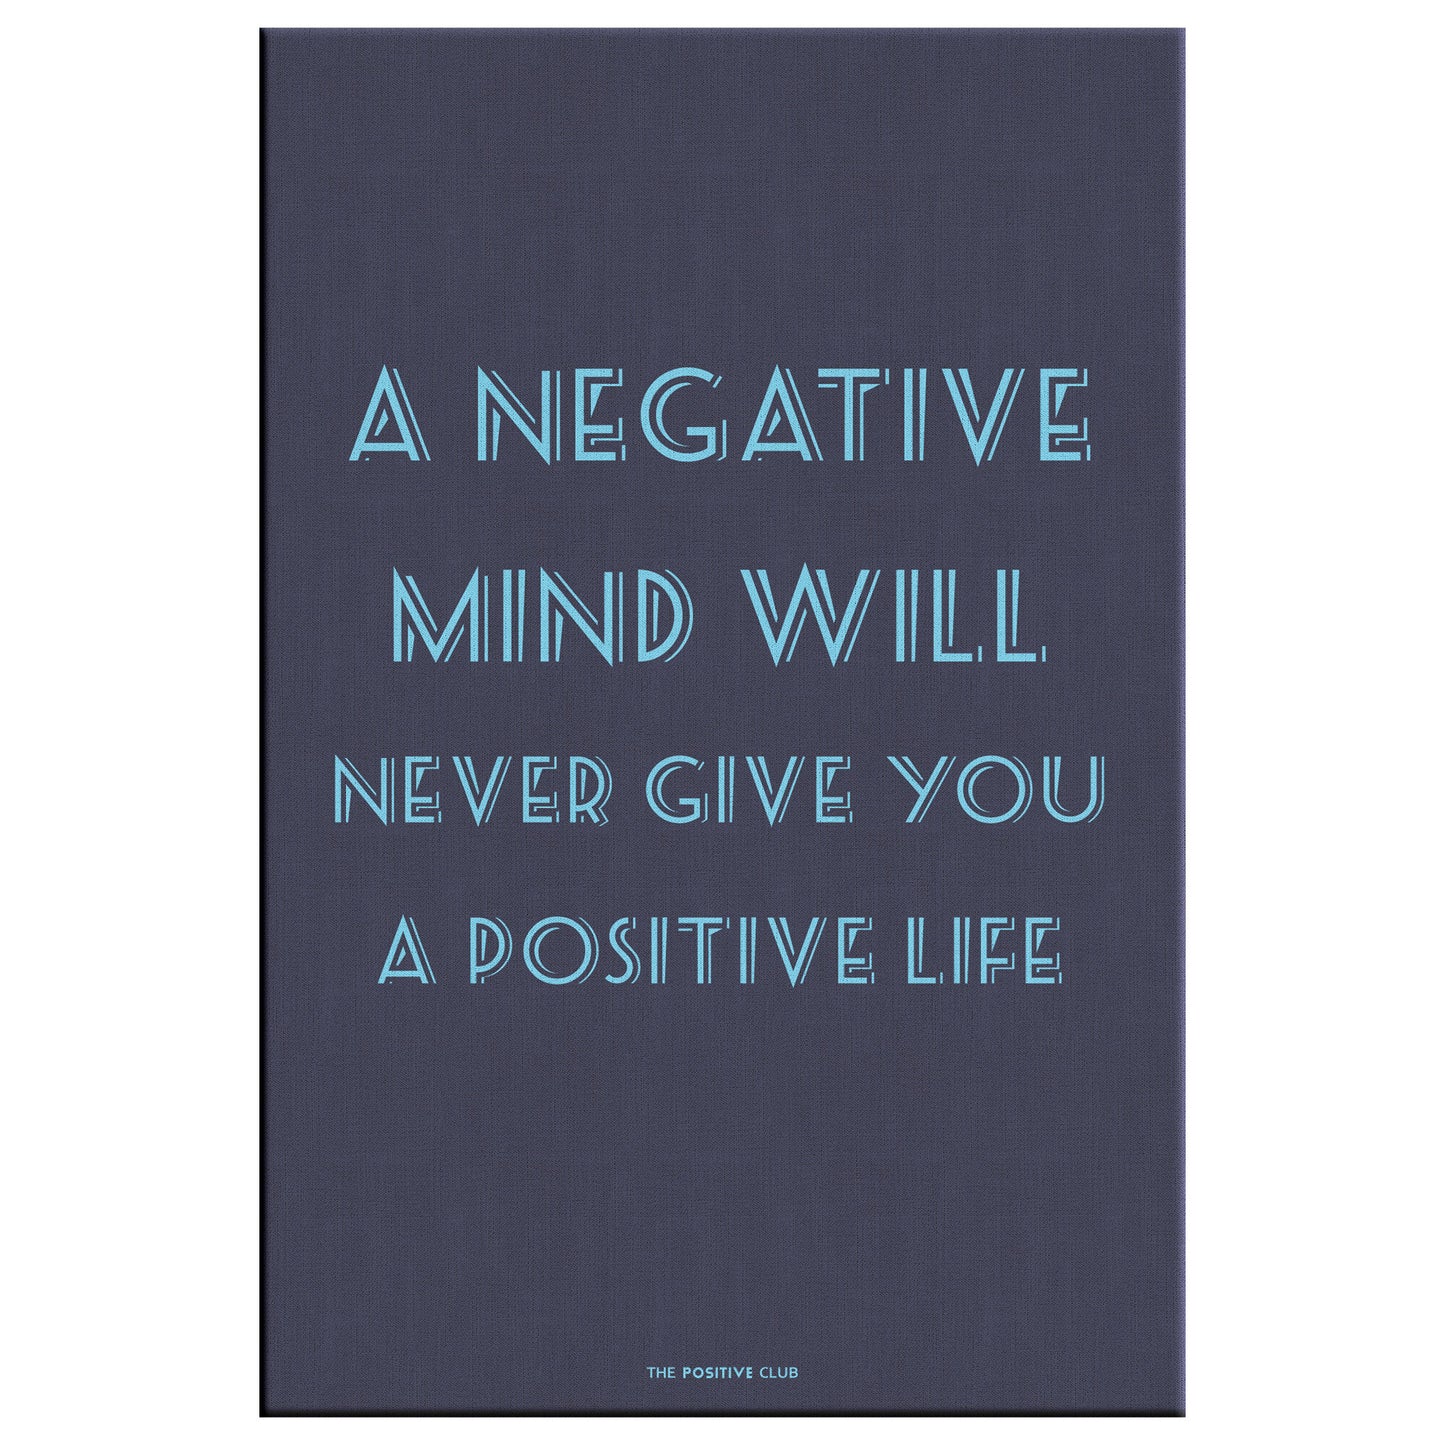 A NEGATIVE MIND WILL NEVER GIVE YOU A POSITIVE LIFE